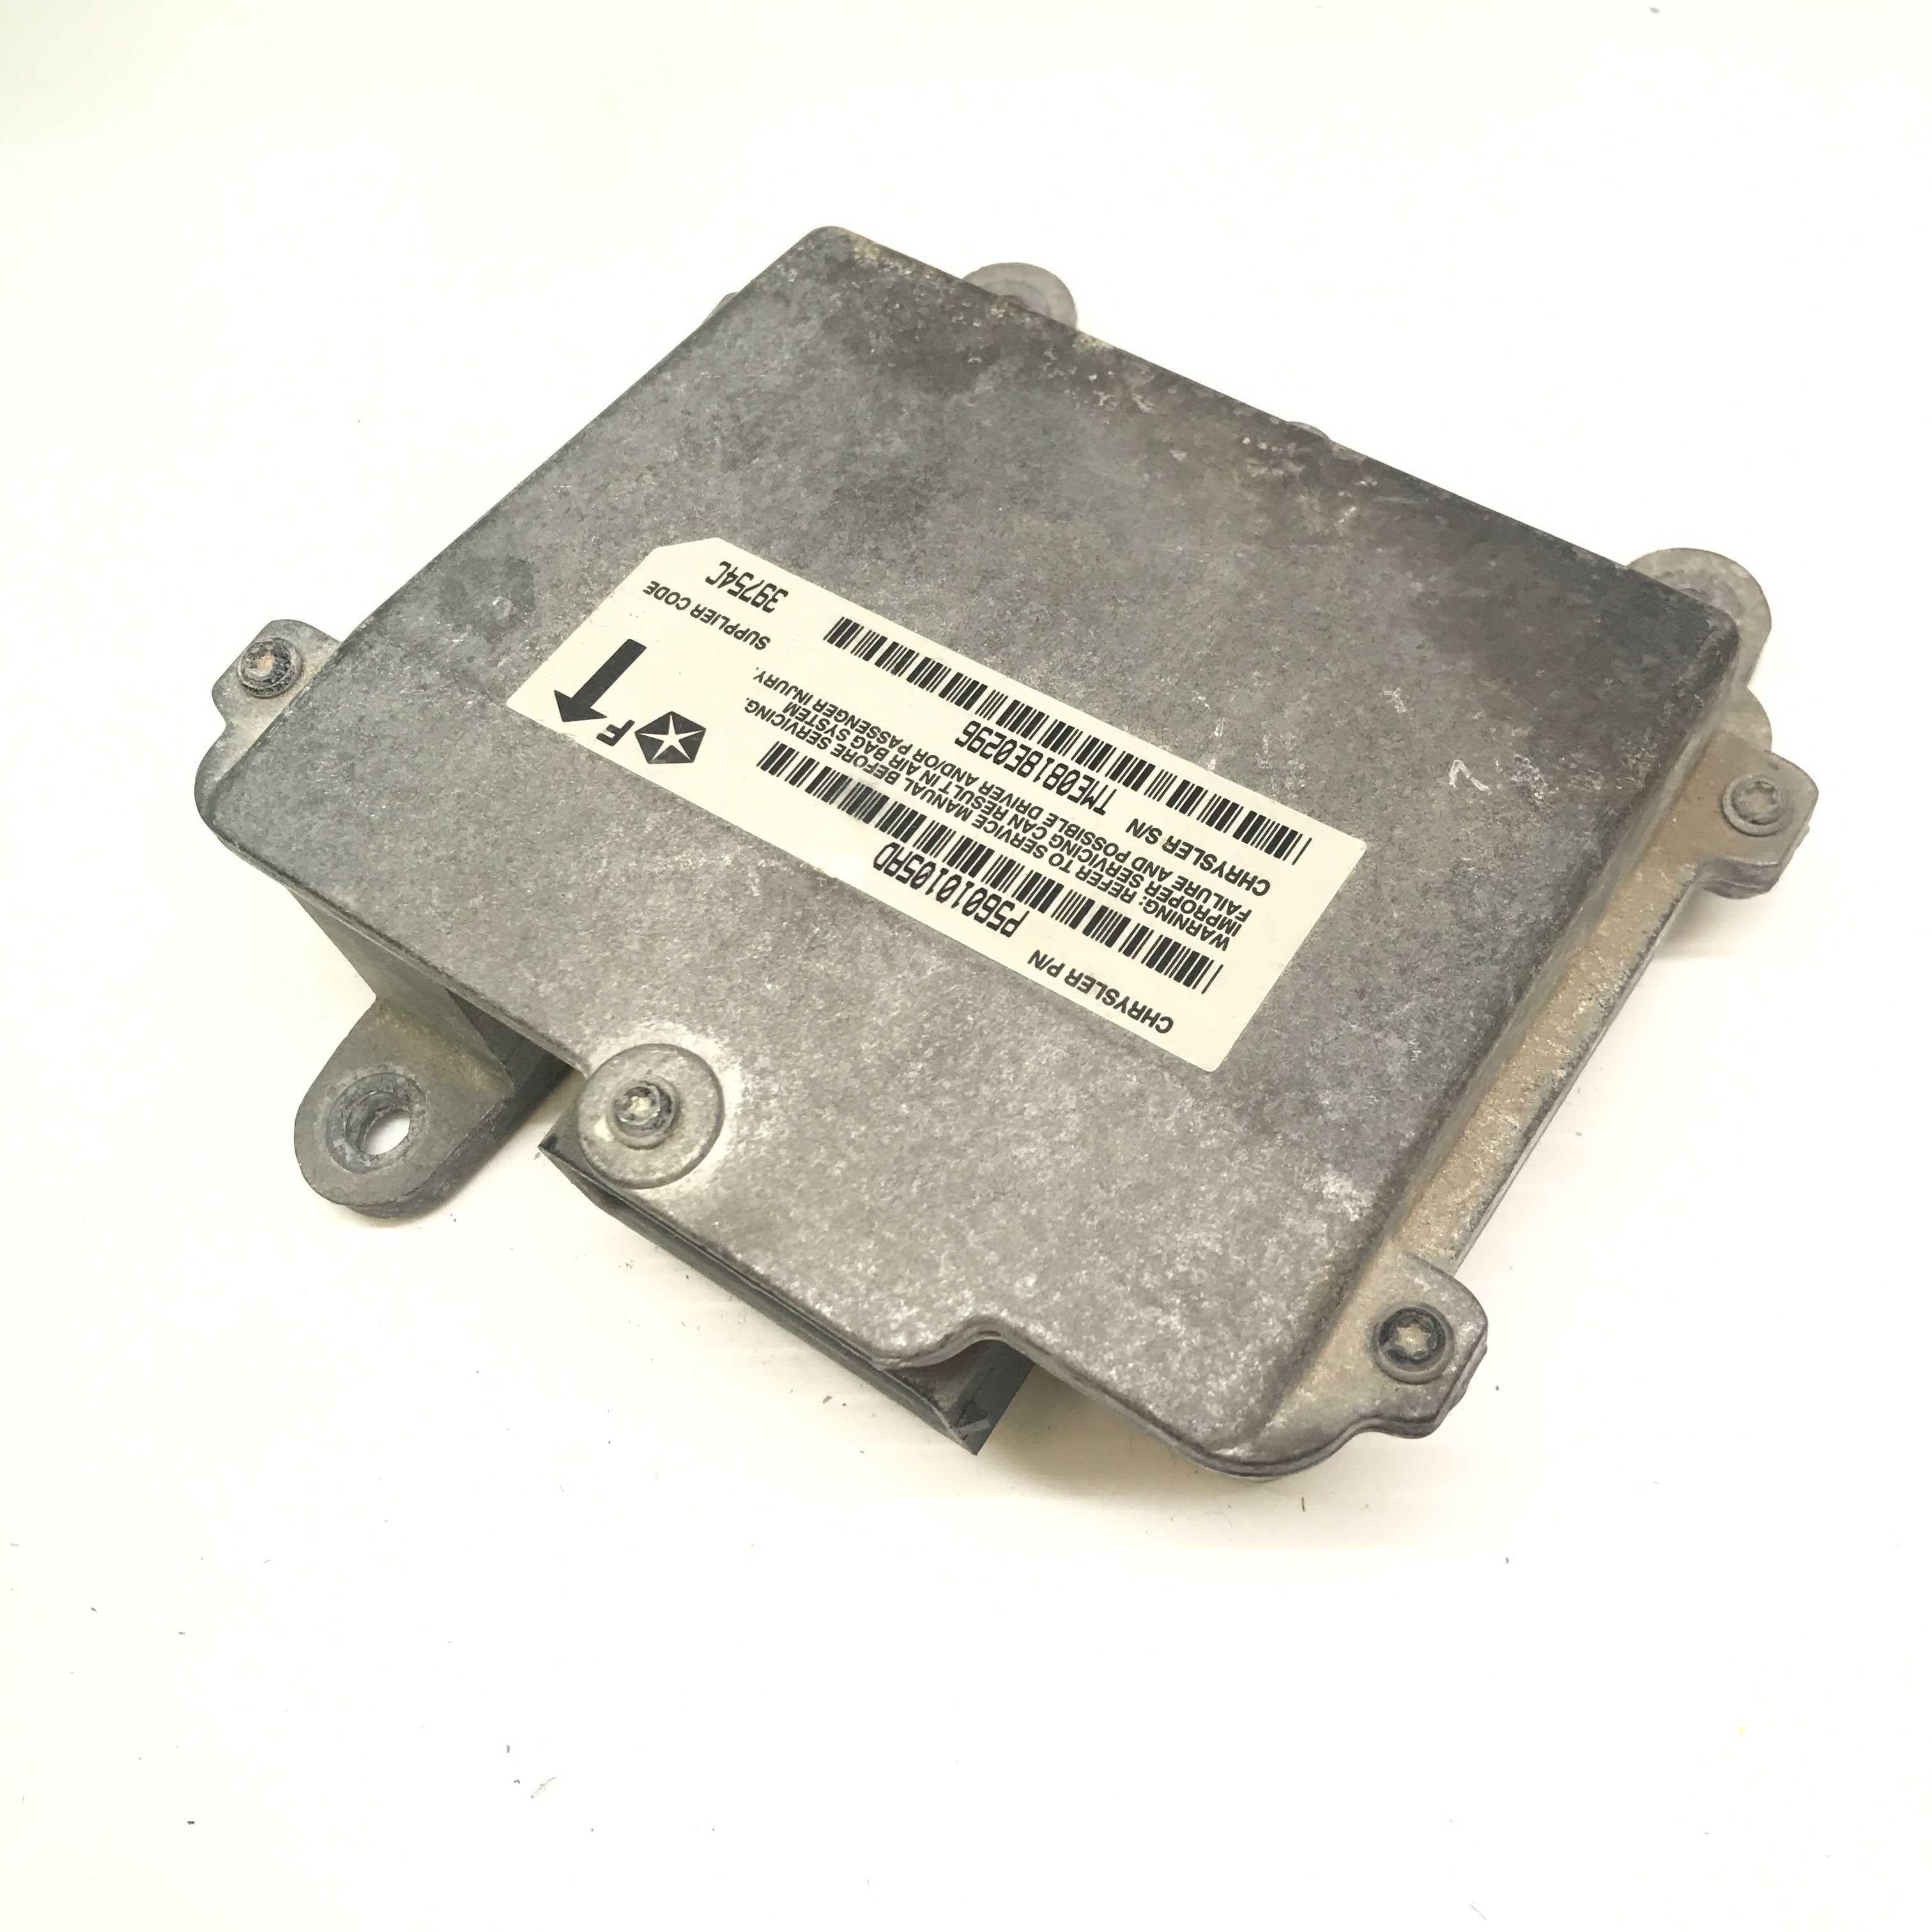 JEEP  WRANGLER SRS Airbag Control Module PART #P56010105AD